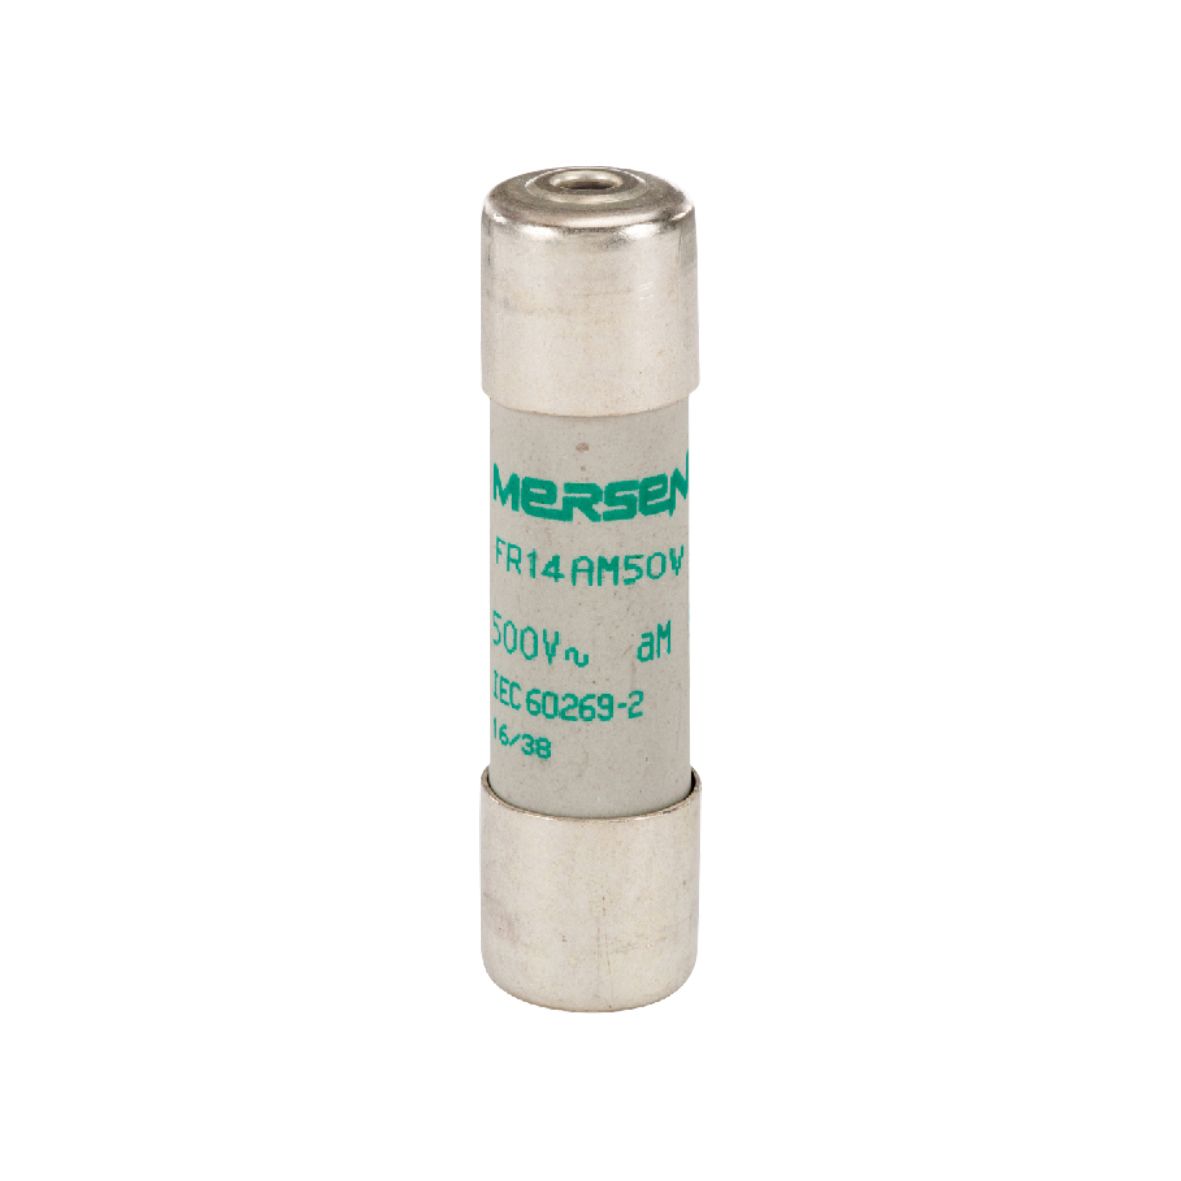 R201817 - Cylindrical fuse-link aM 500VAC 14.3x51, 12A with striker